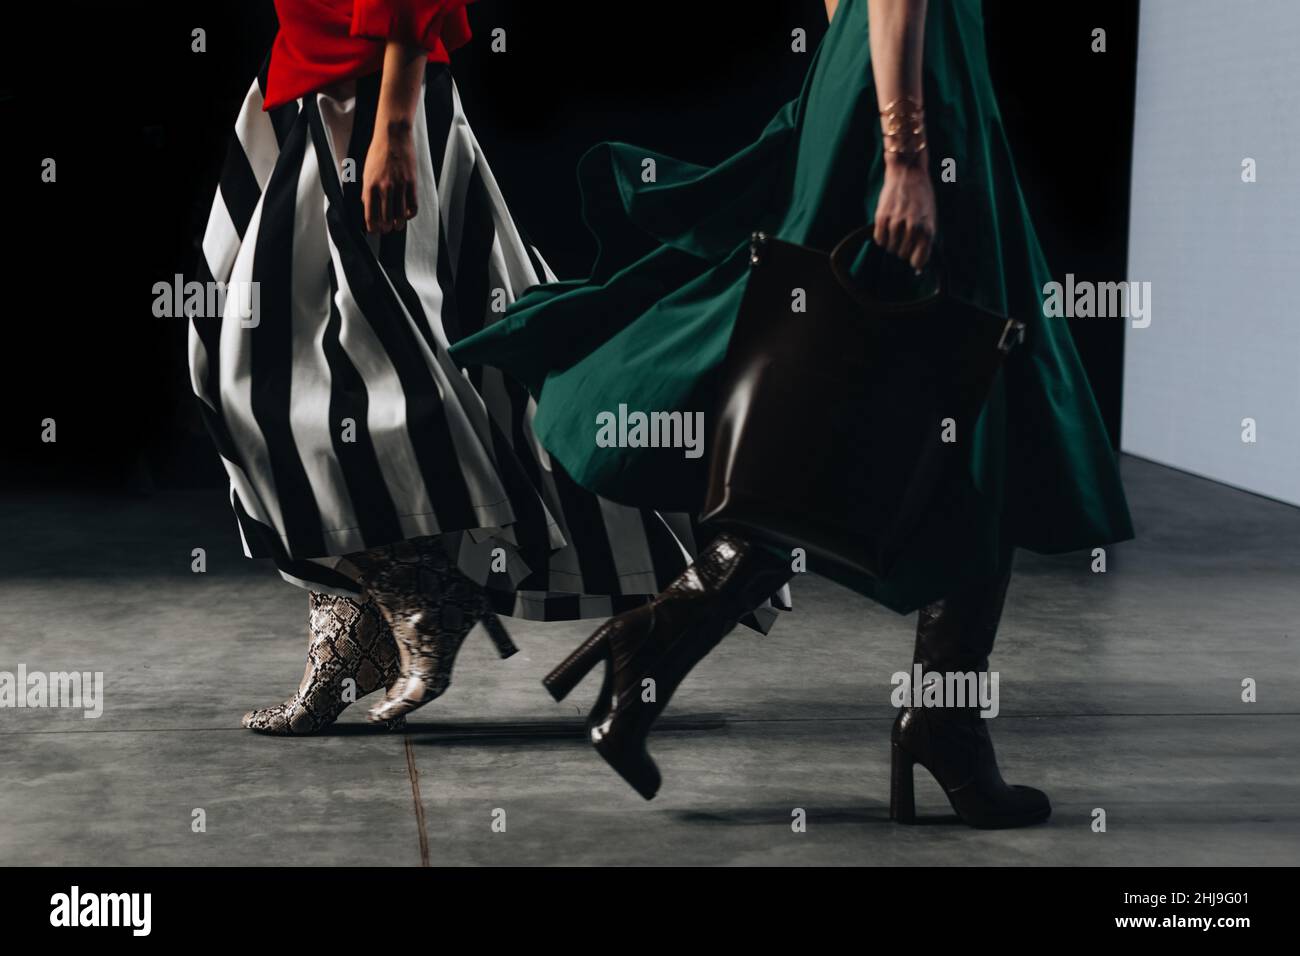 Two cropped female figures dressed in a stylish long striped black white skirt, red jacket and green dress walking the runway. Fashion week details Stock Photo